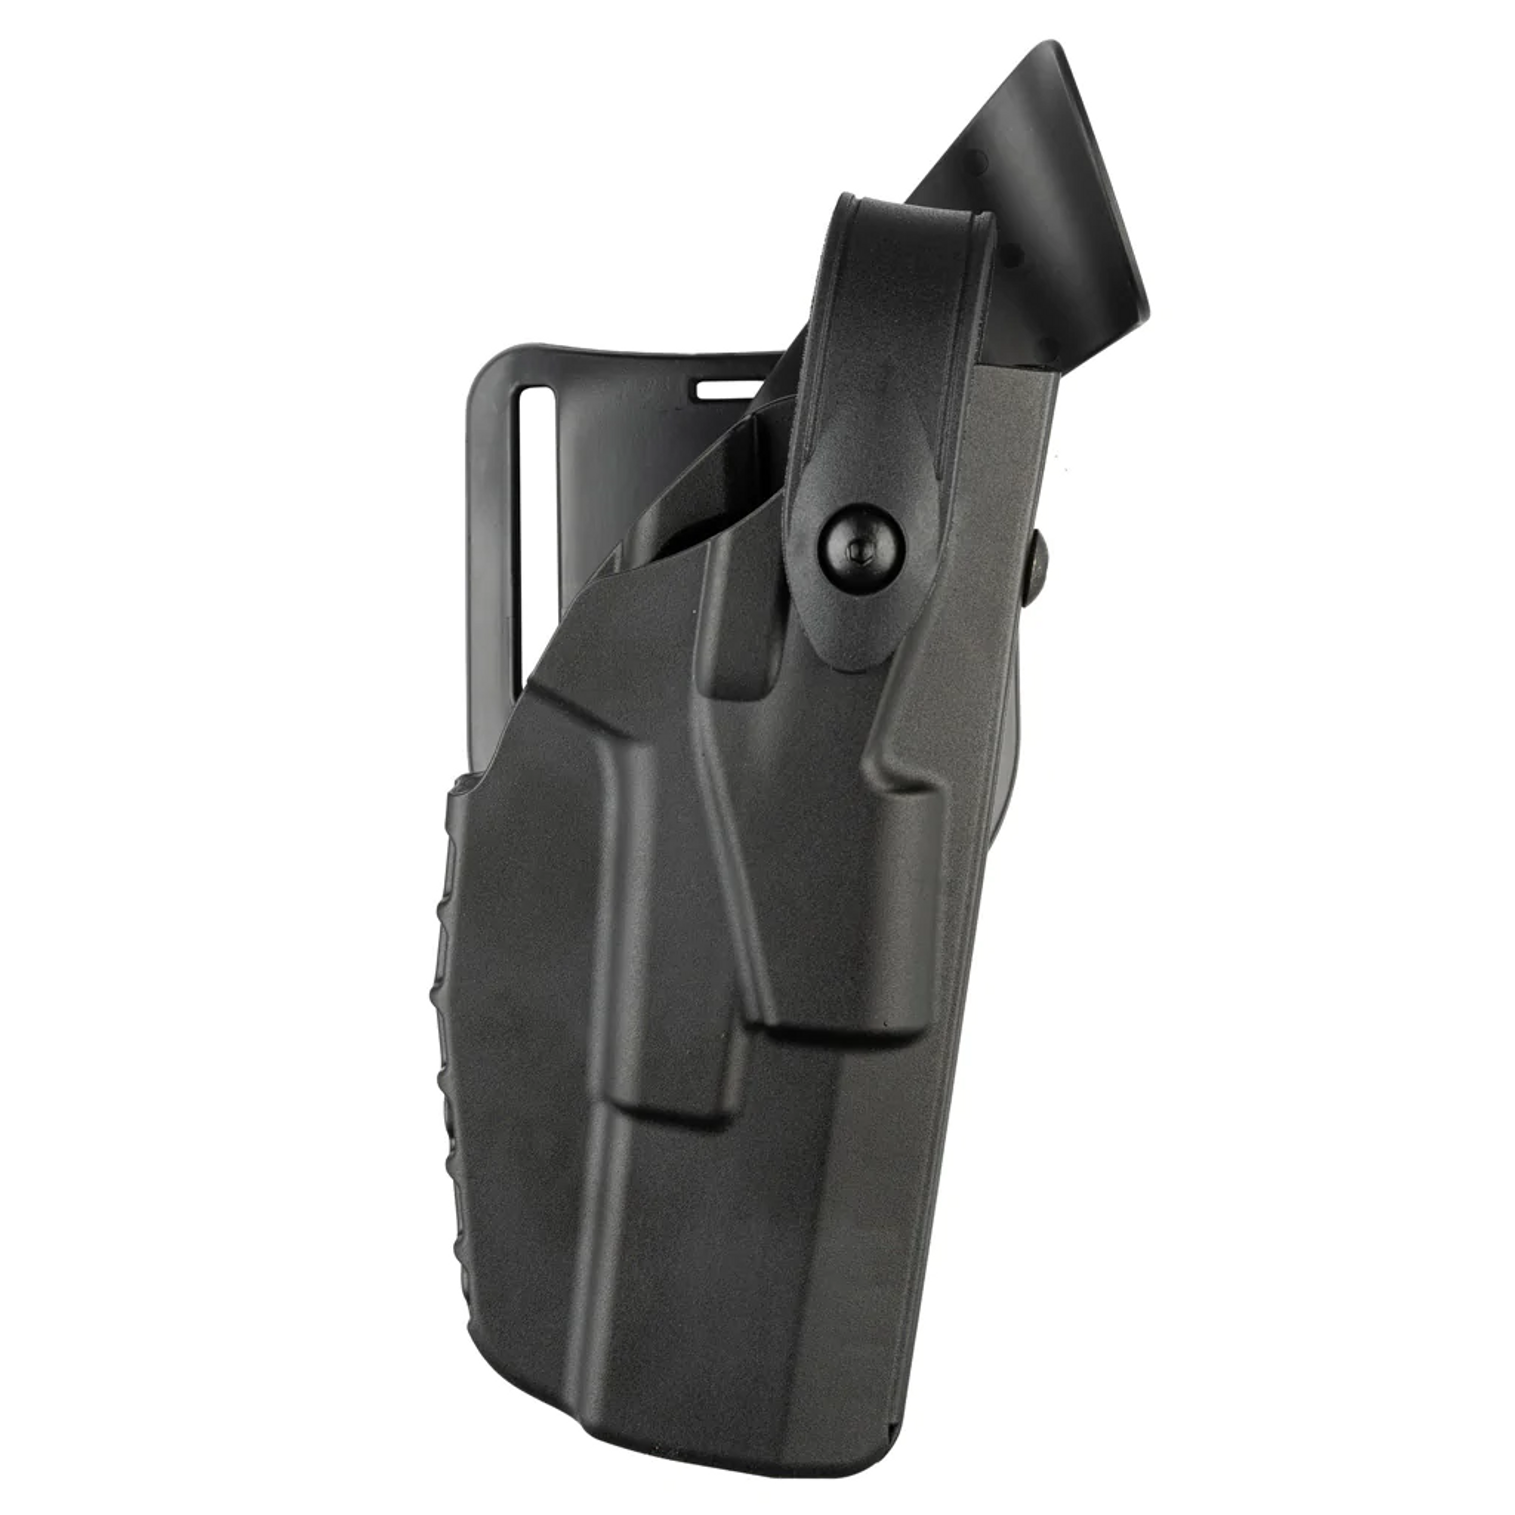 Model 7280 7ts Sls Mid-ride, Level Ii Retention Duty Holster For Smith & Wesson M&p 9